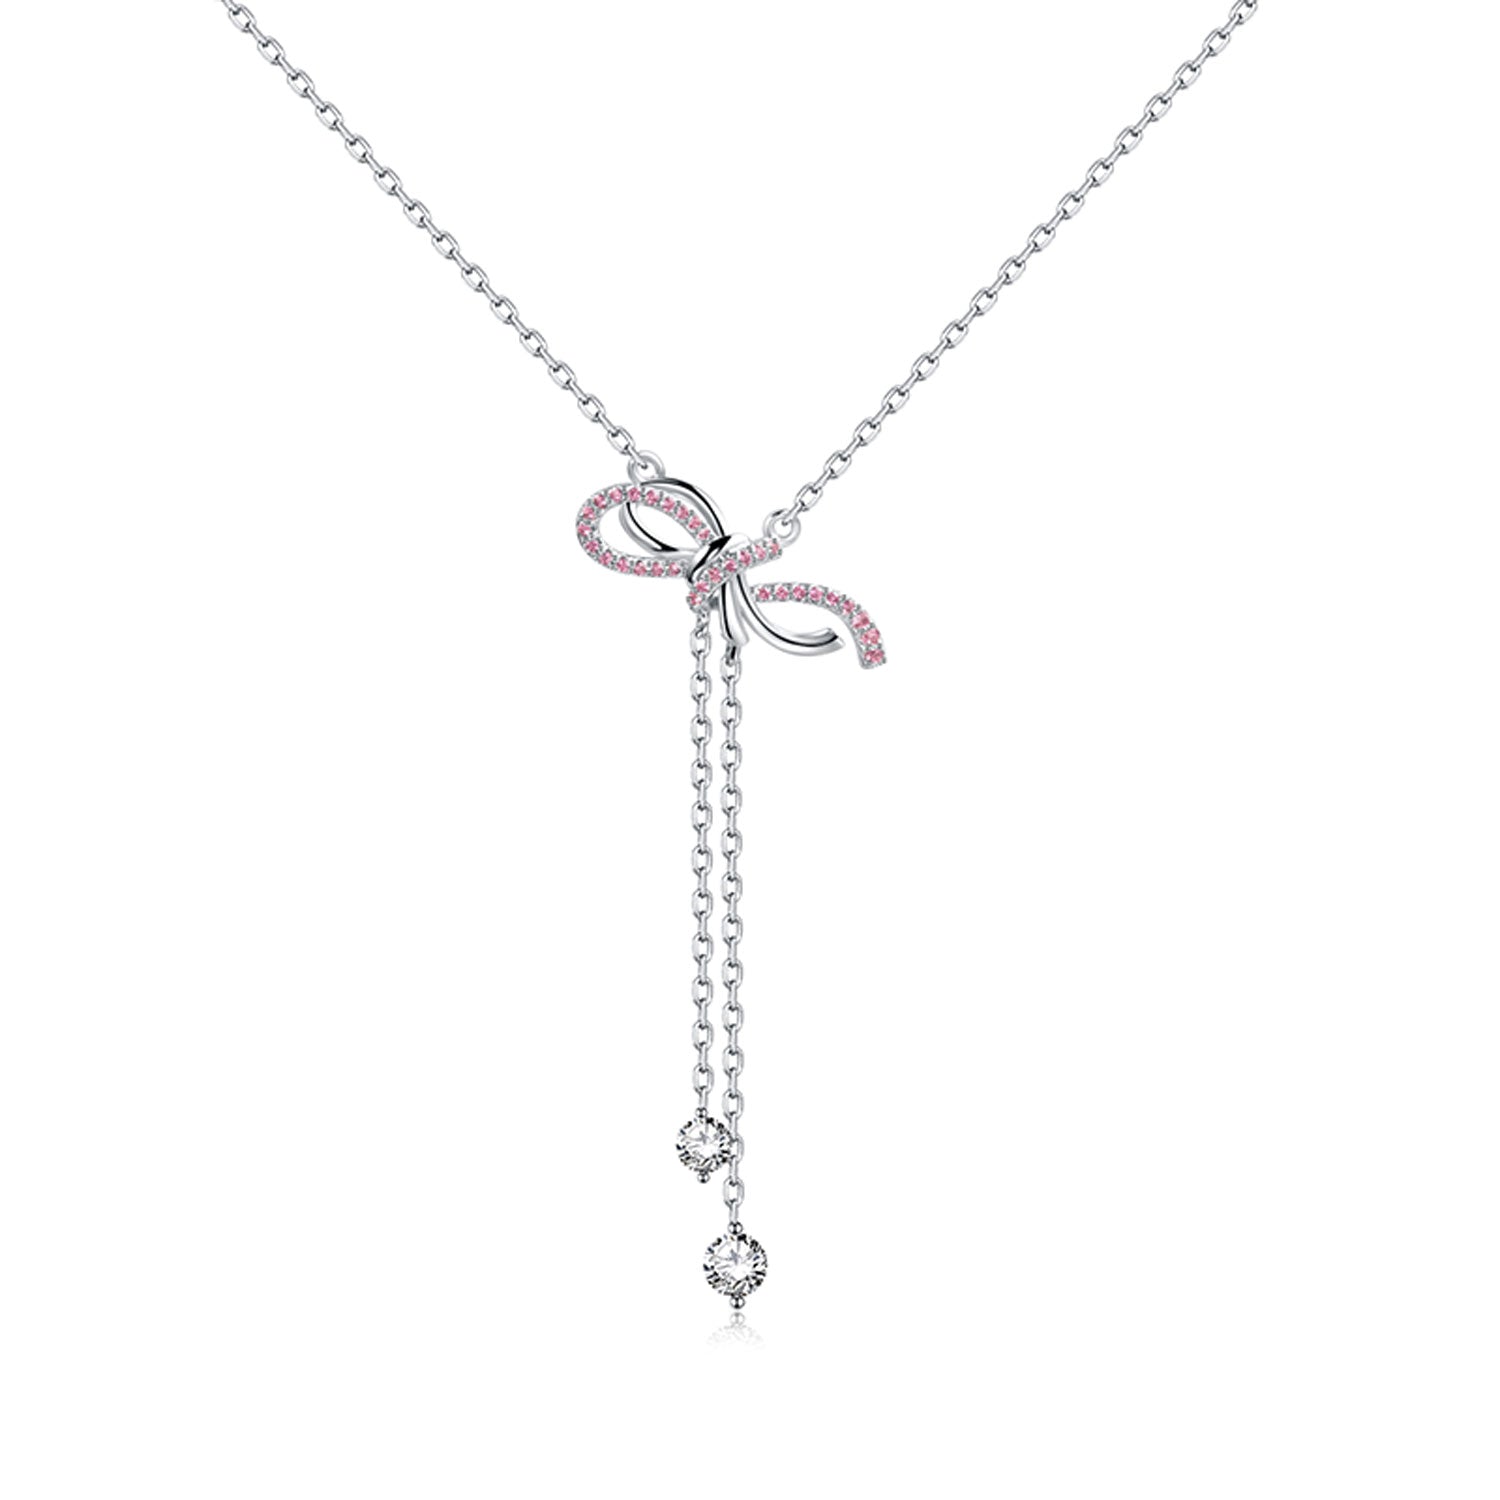 FANCIME “Momoiro Bow” Sweet Bow White Long Drop Sterling Silver Necklace Main